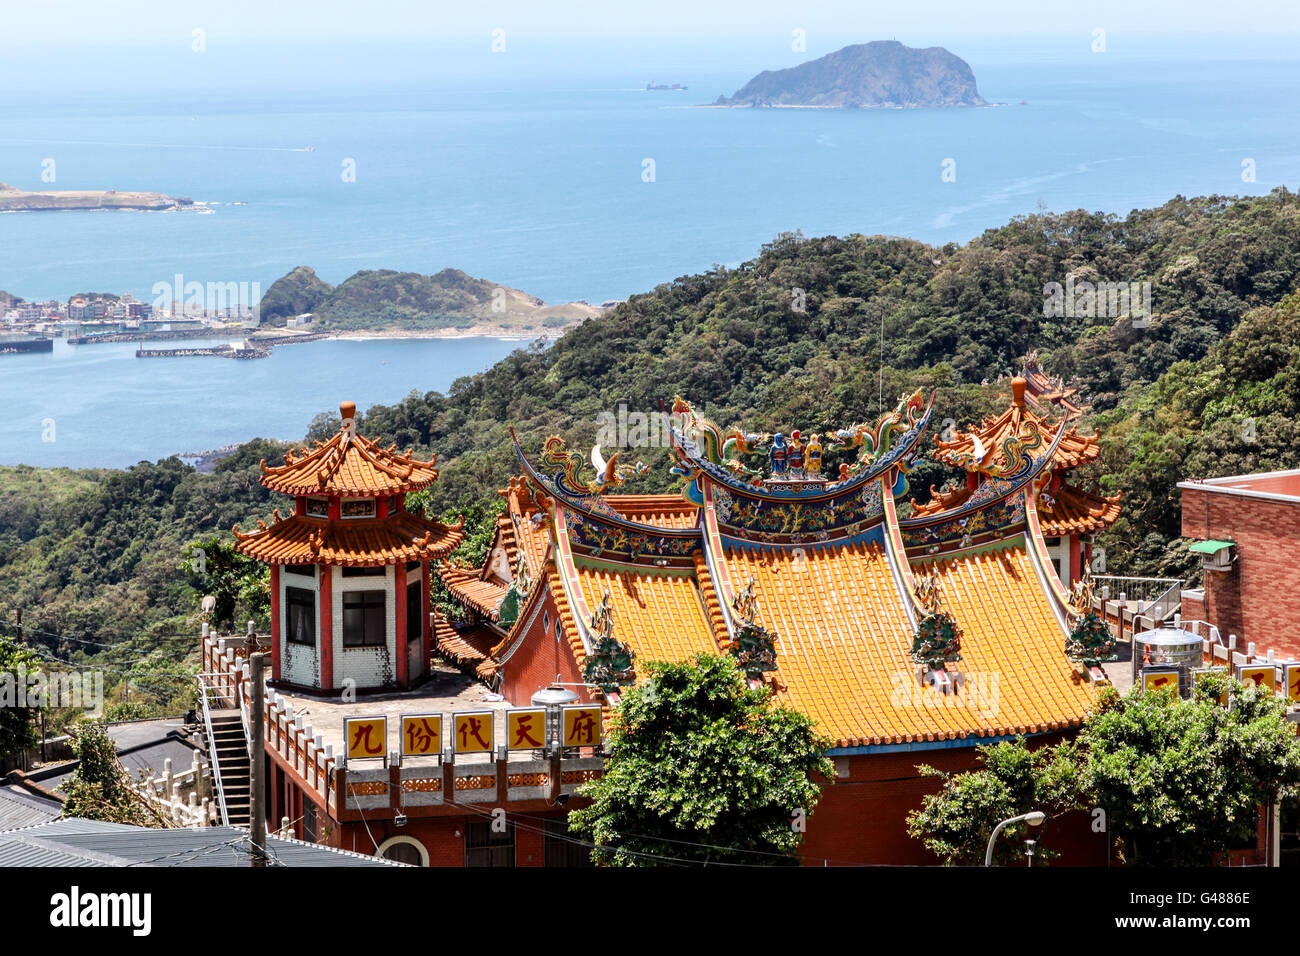 The colorful intricate rooftop of a Chinese temple on the hillside in Jiufen, New Taipei City, overlooks the shores of Taiwan on Stock Photo